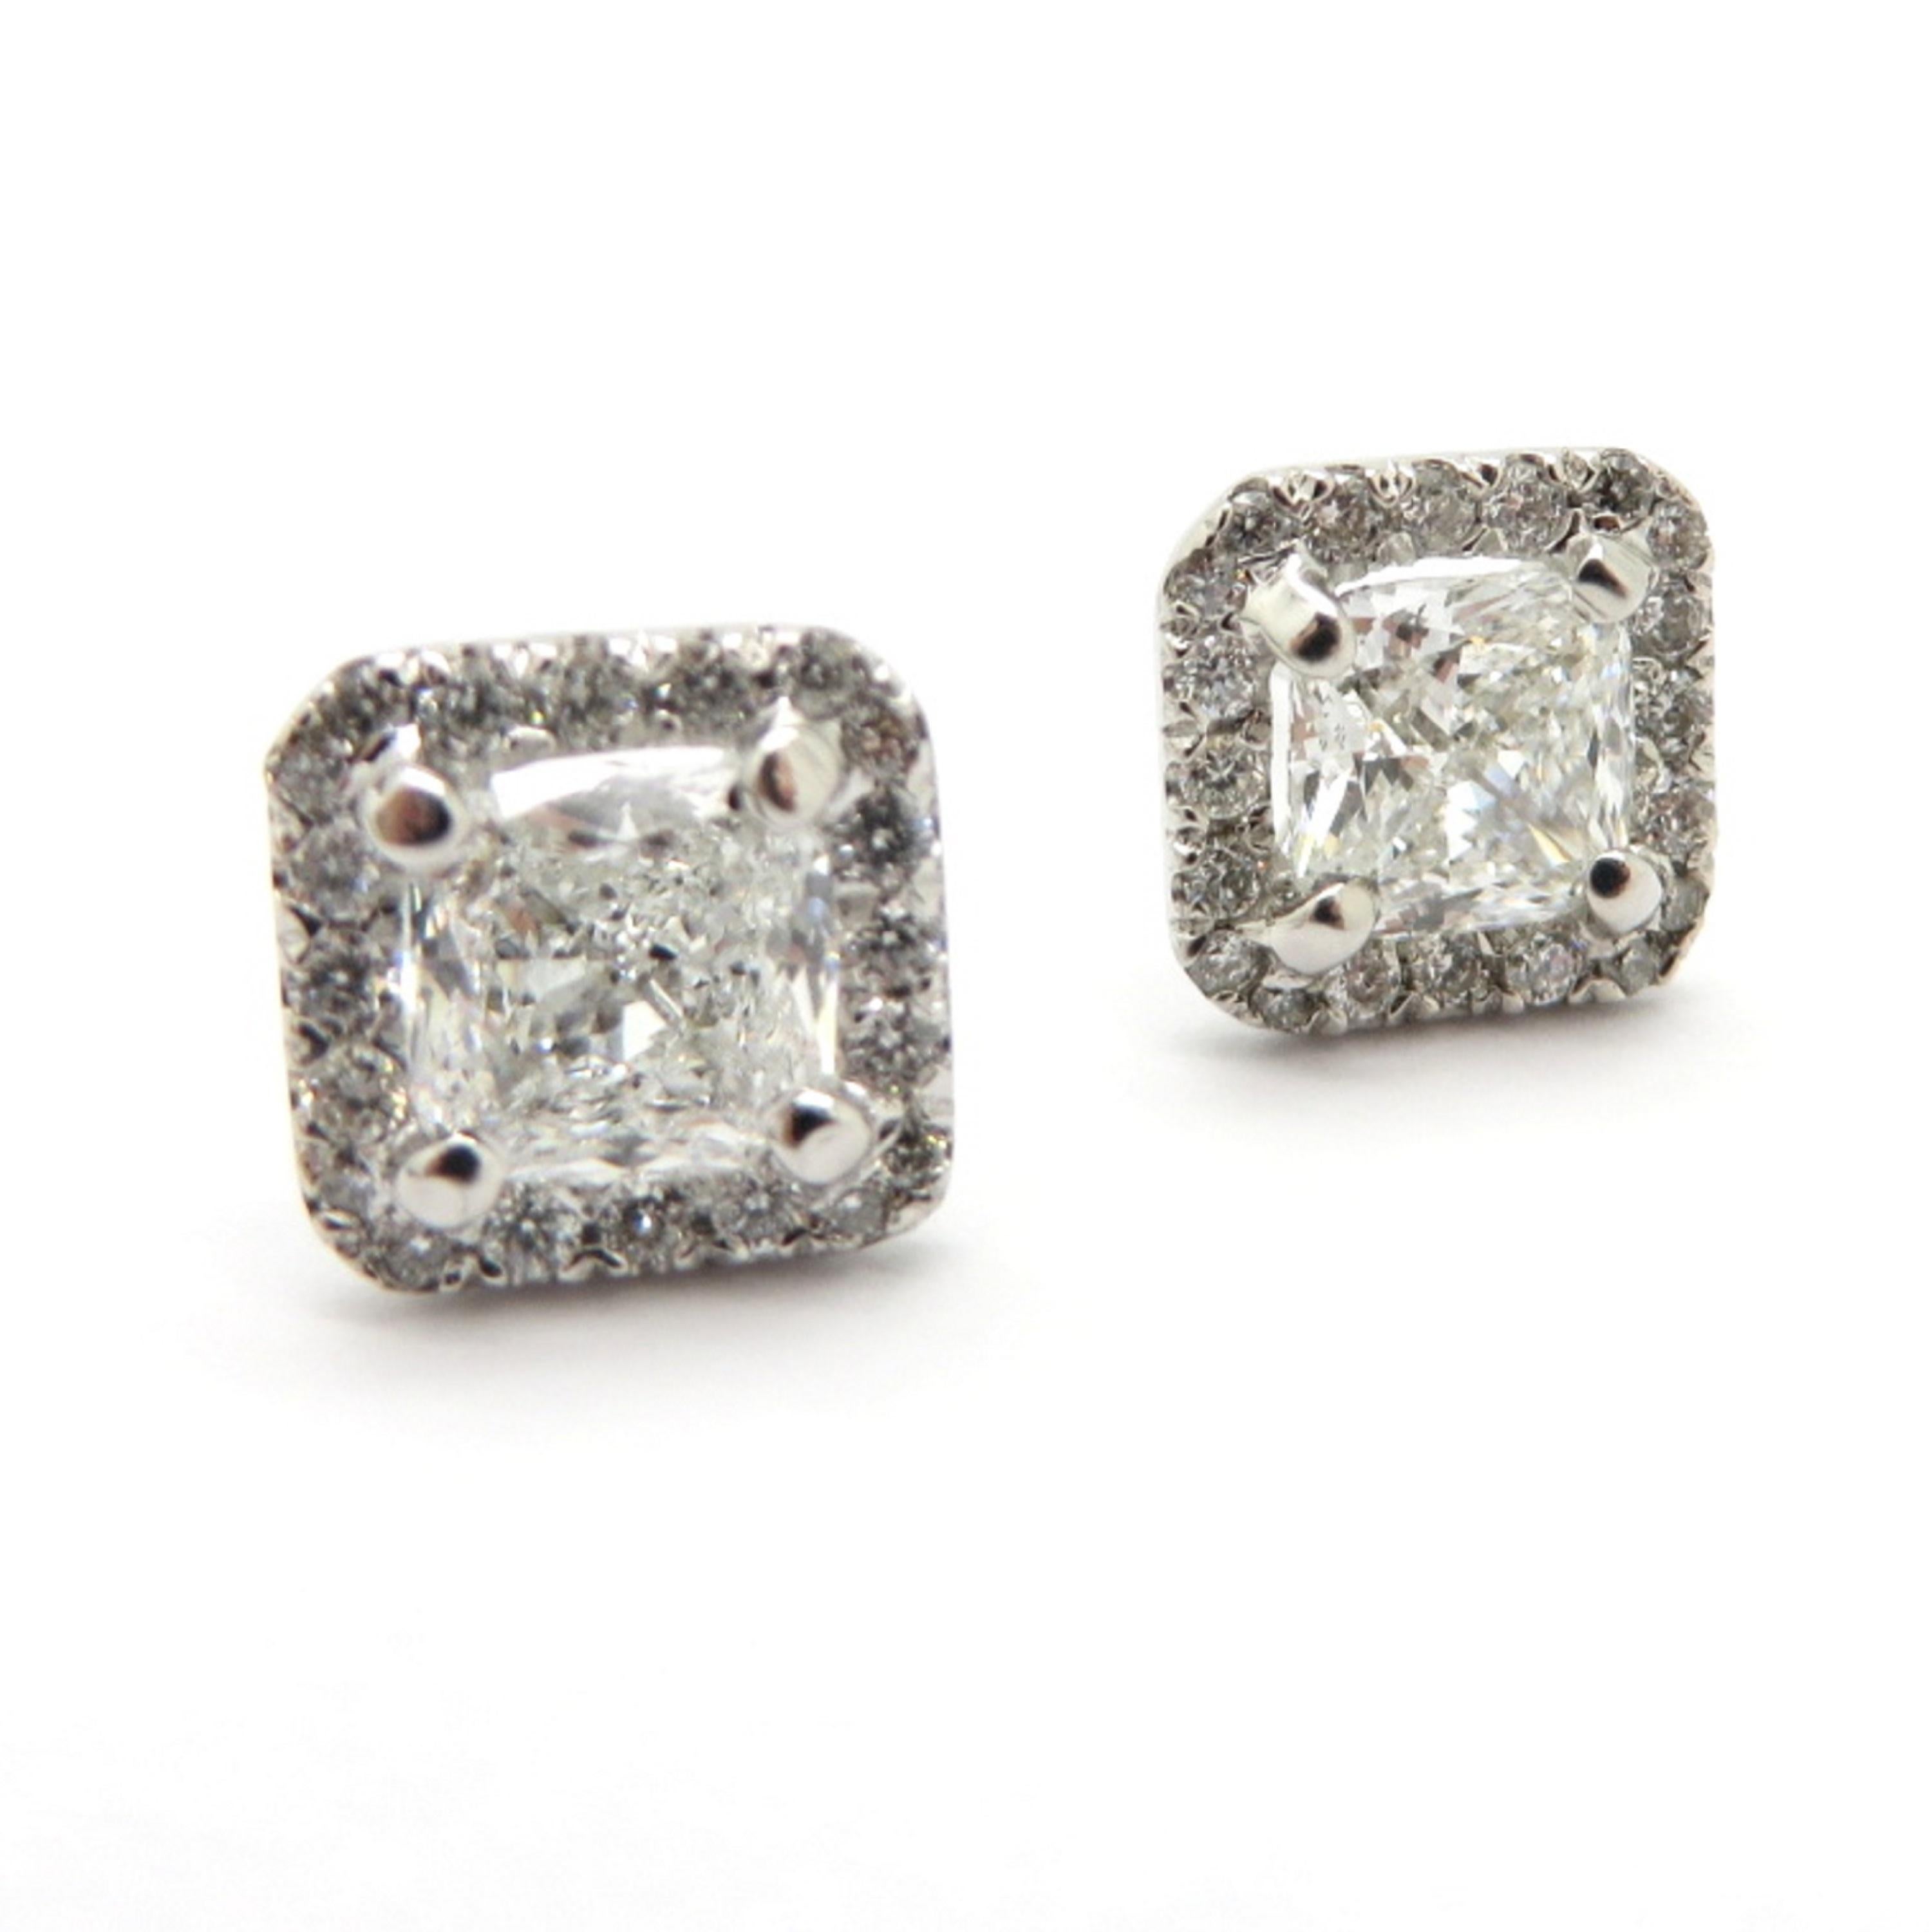 For sale is a gorgeous pair of Estate 14K White Gold Diamond Halo Cushion & Round Earrings!
Showcasing two Cushion Cut diamonds, each four prong set, weighing a combined total of 1.80 carats. Diamond Grading: Color Grade: G. Clarity Grade: VS1.